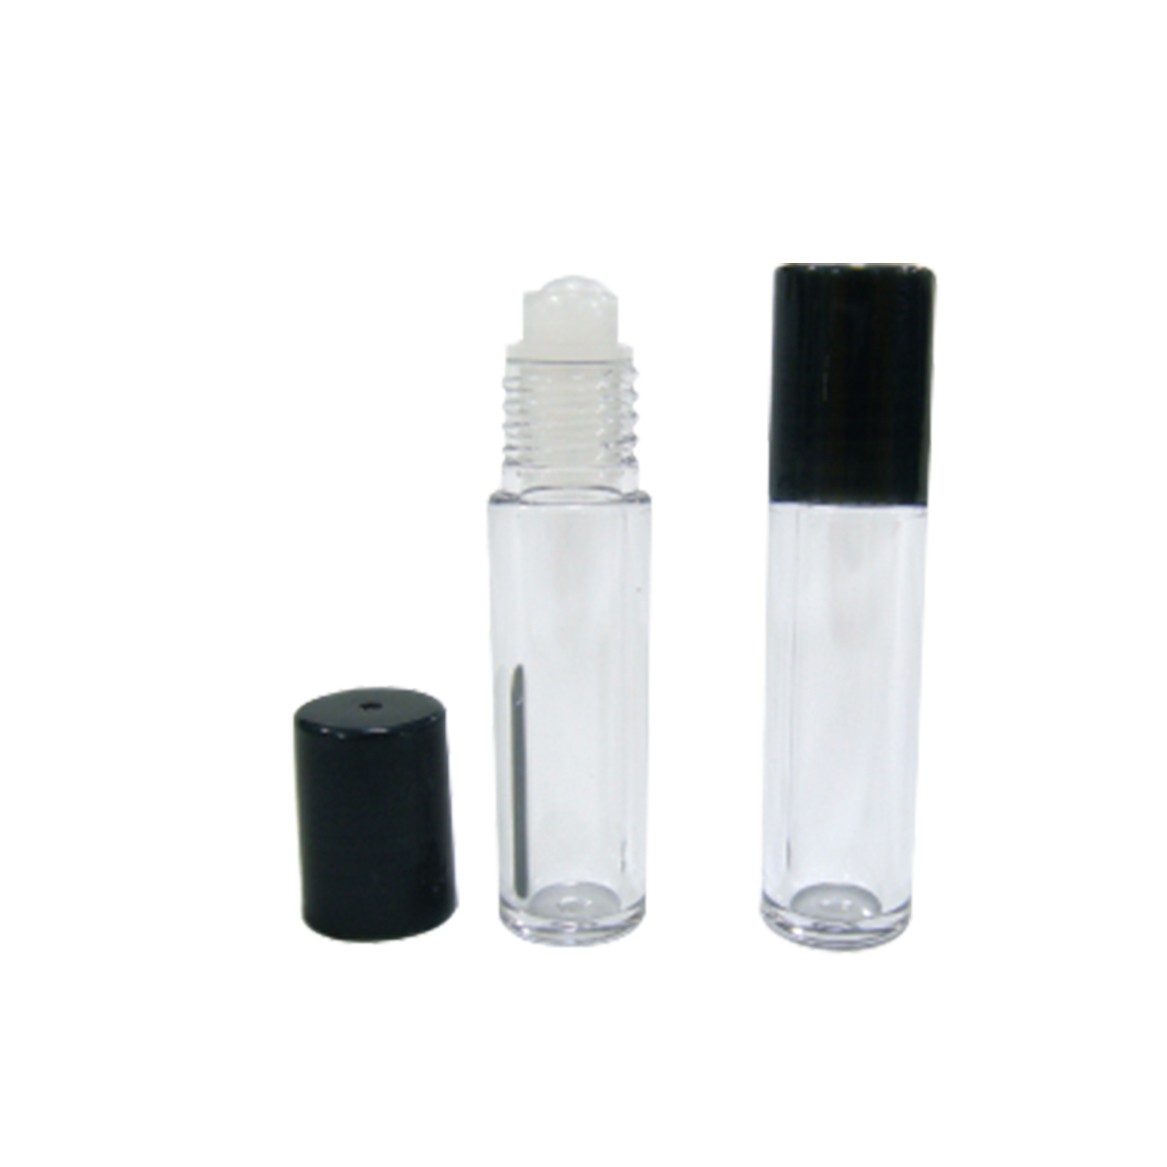 Glamorous 4ml roll on perfume bottle essential oils pure calm wellness concentrate